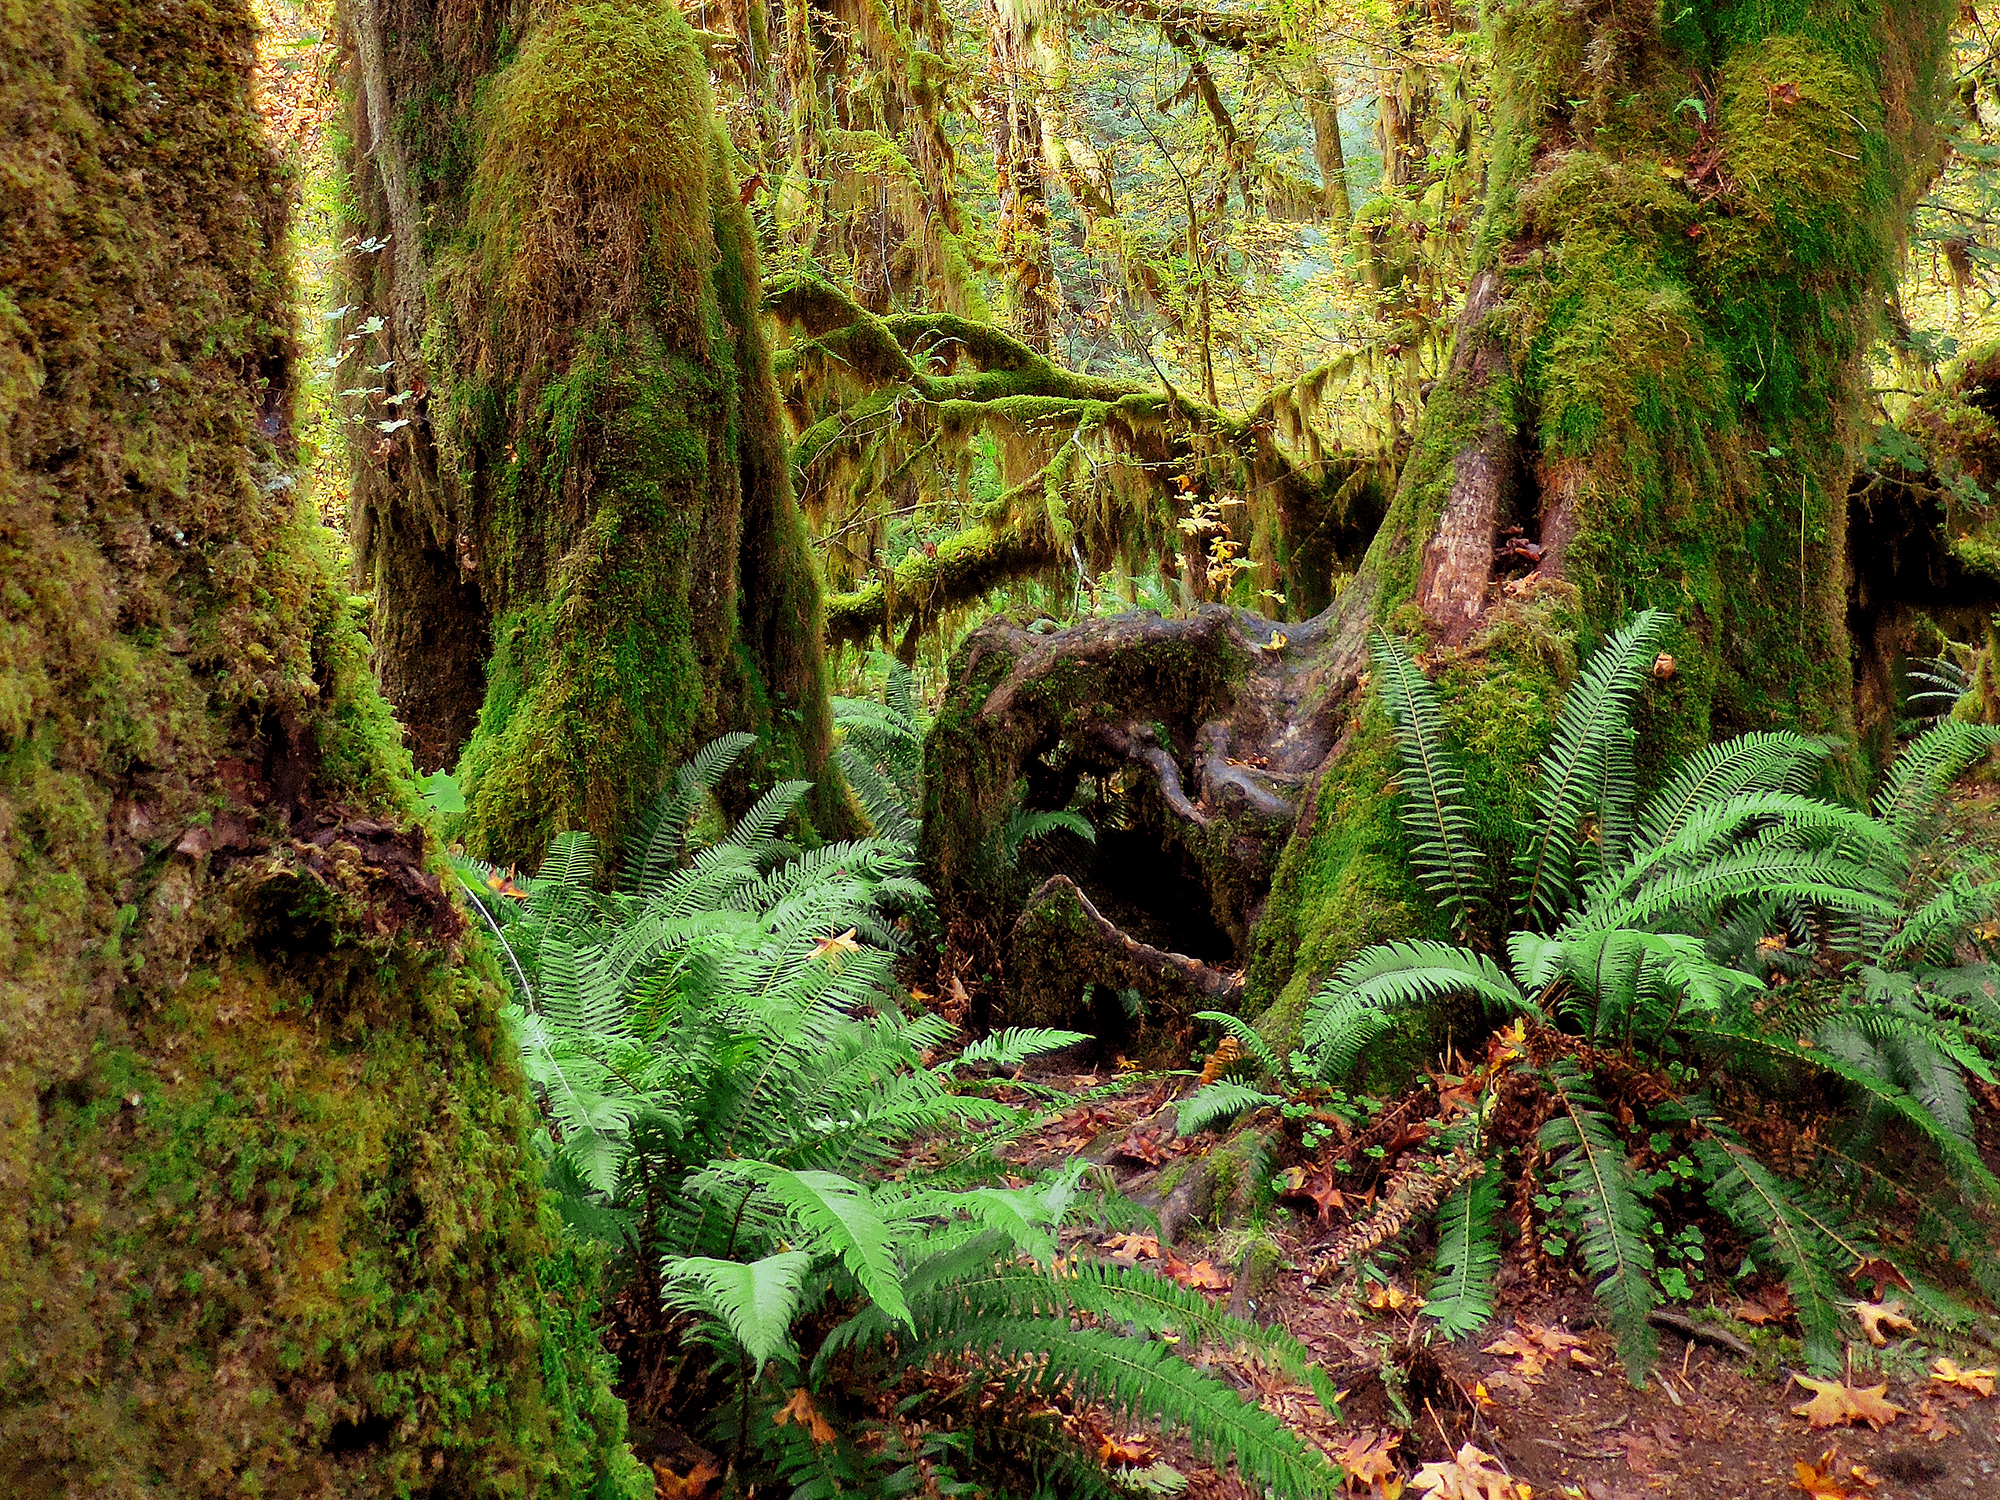 A lush forest with ferns and moss-covered trees